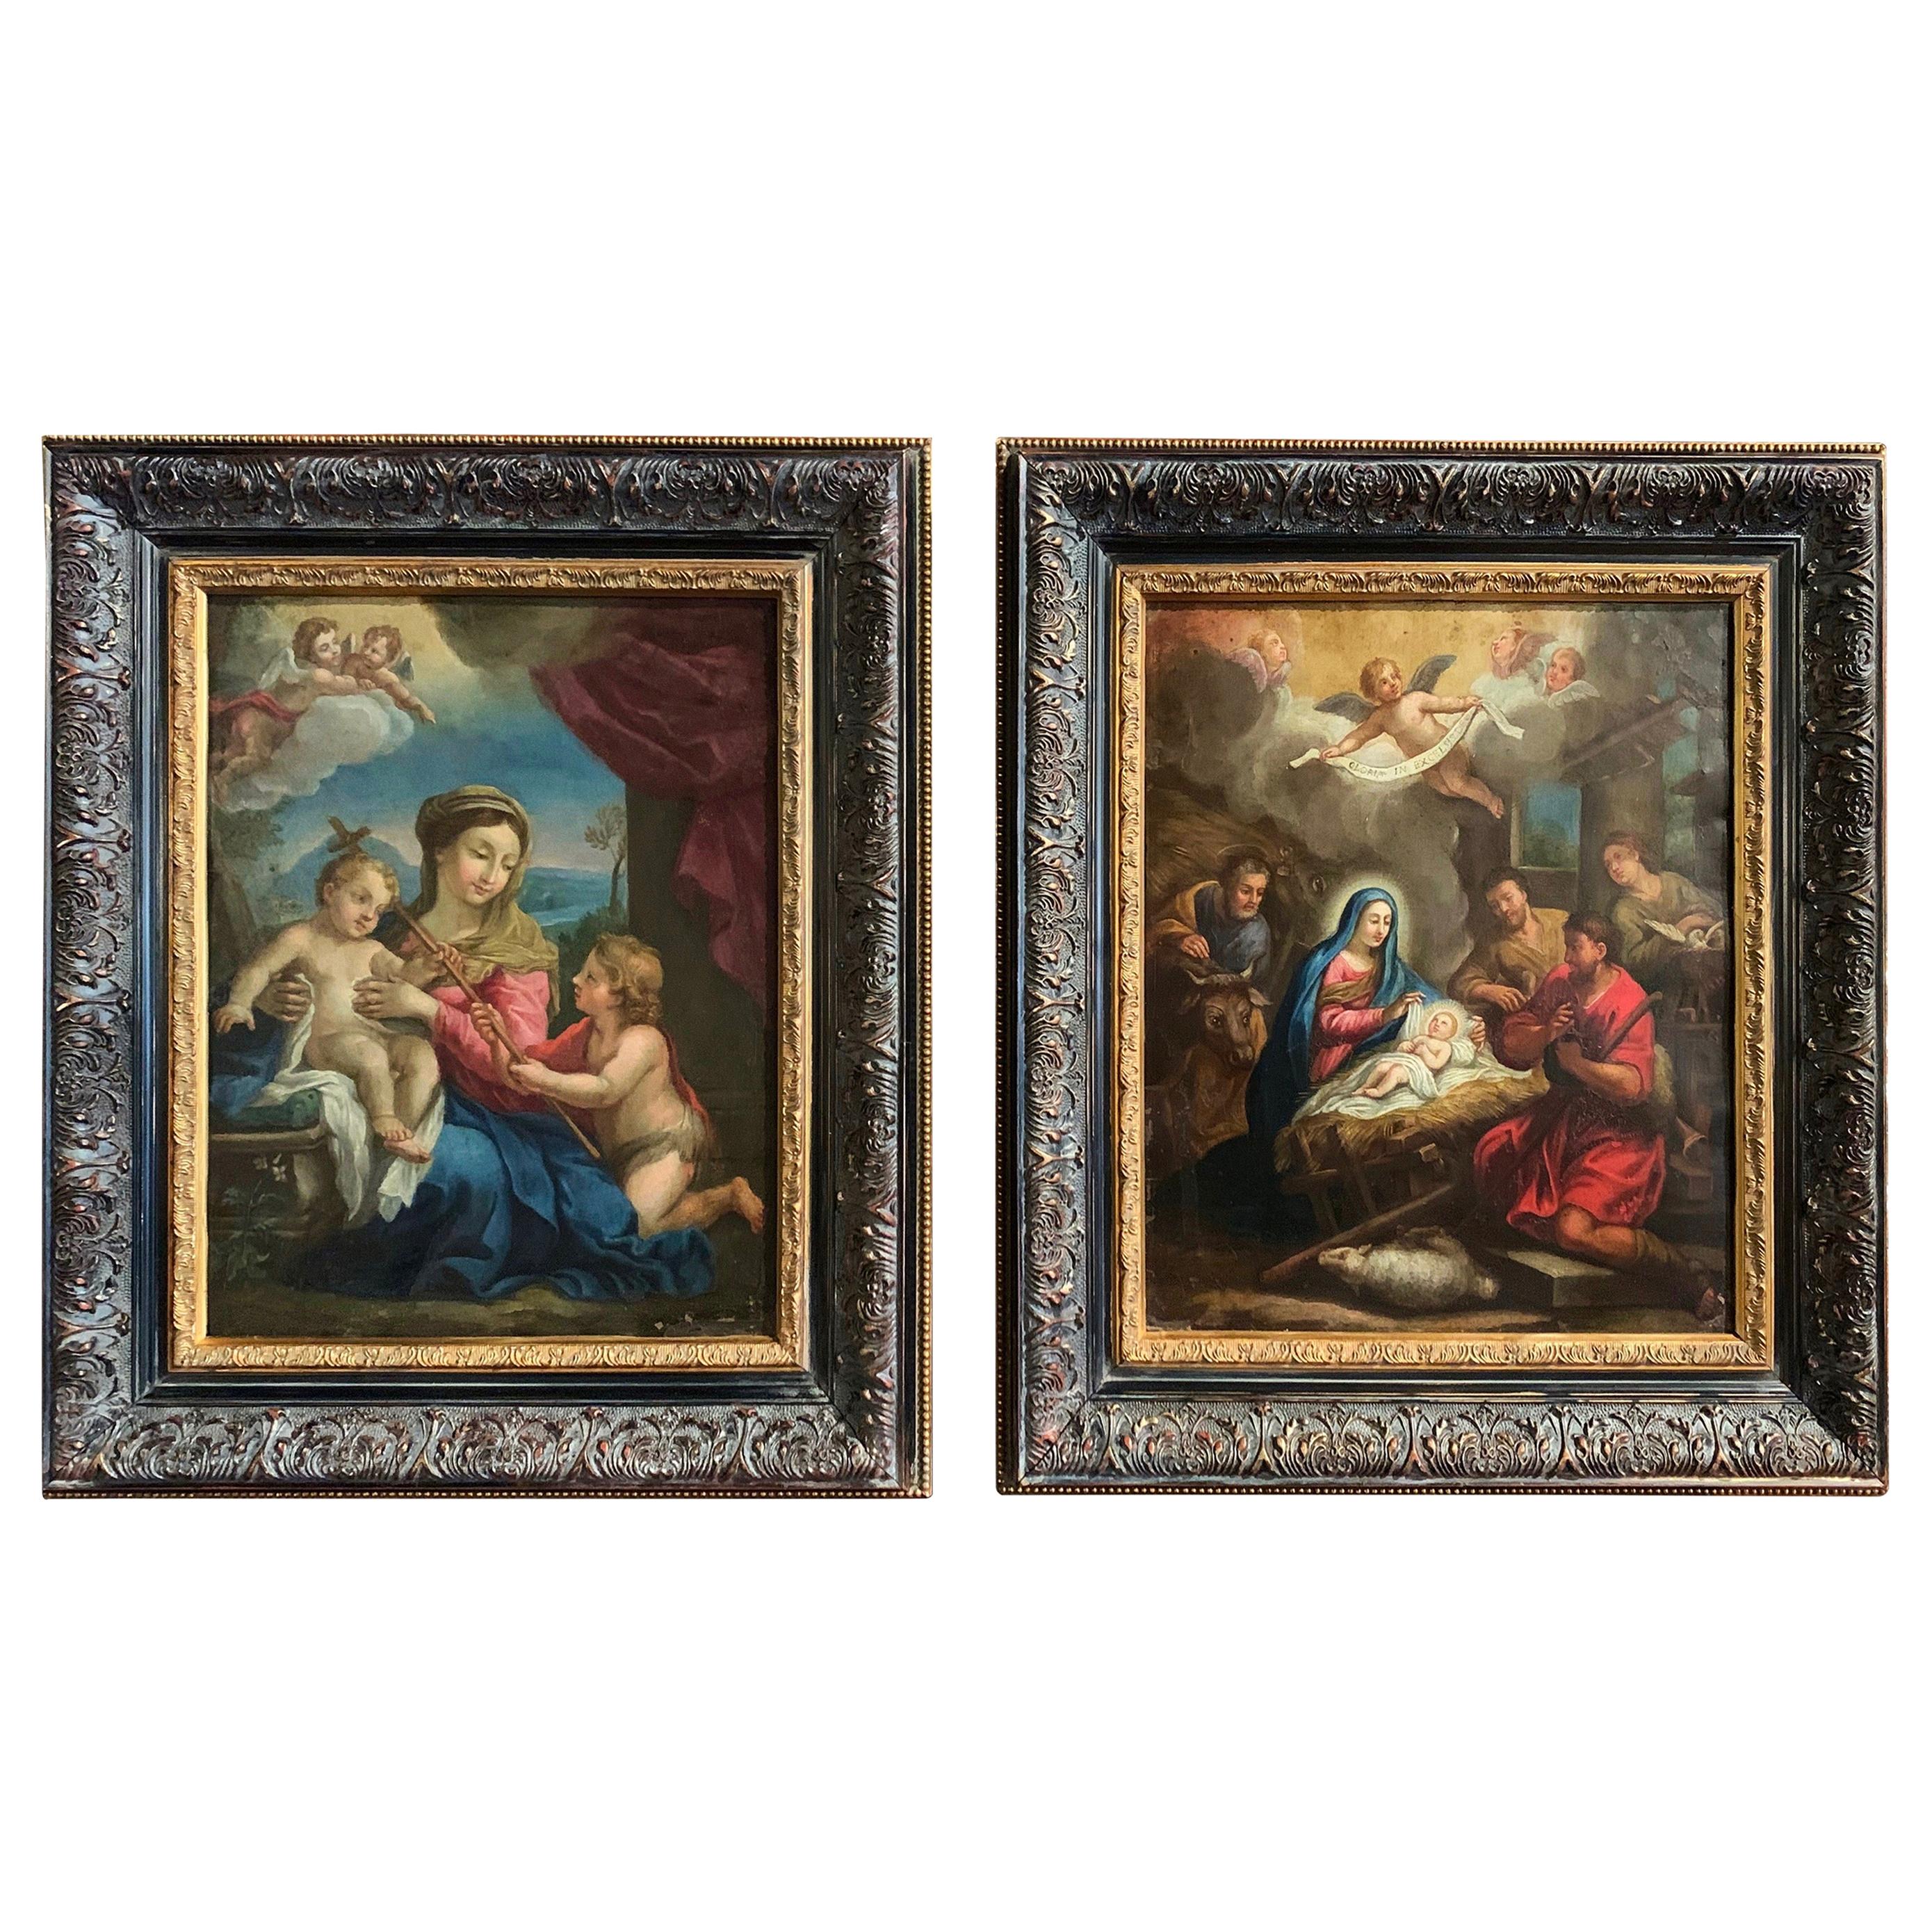 Pair of 18th Century Italian Religious Oil Paintings on Copper in Carved Frames